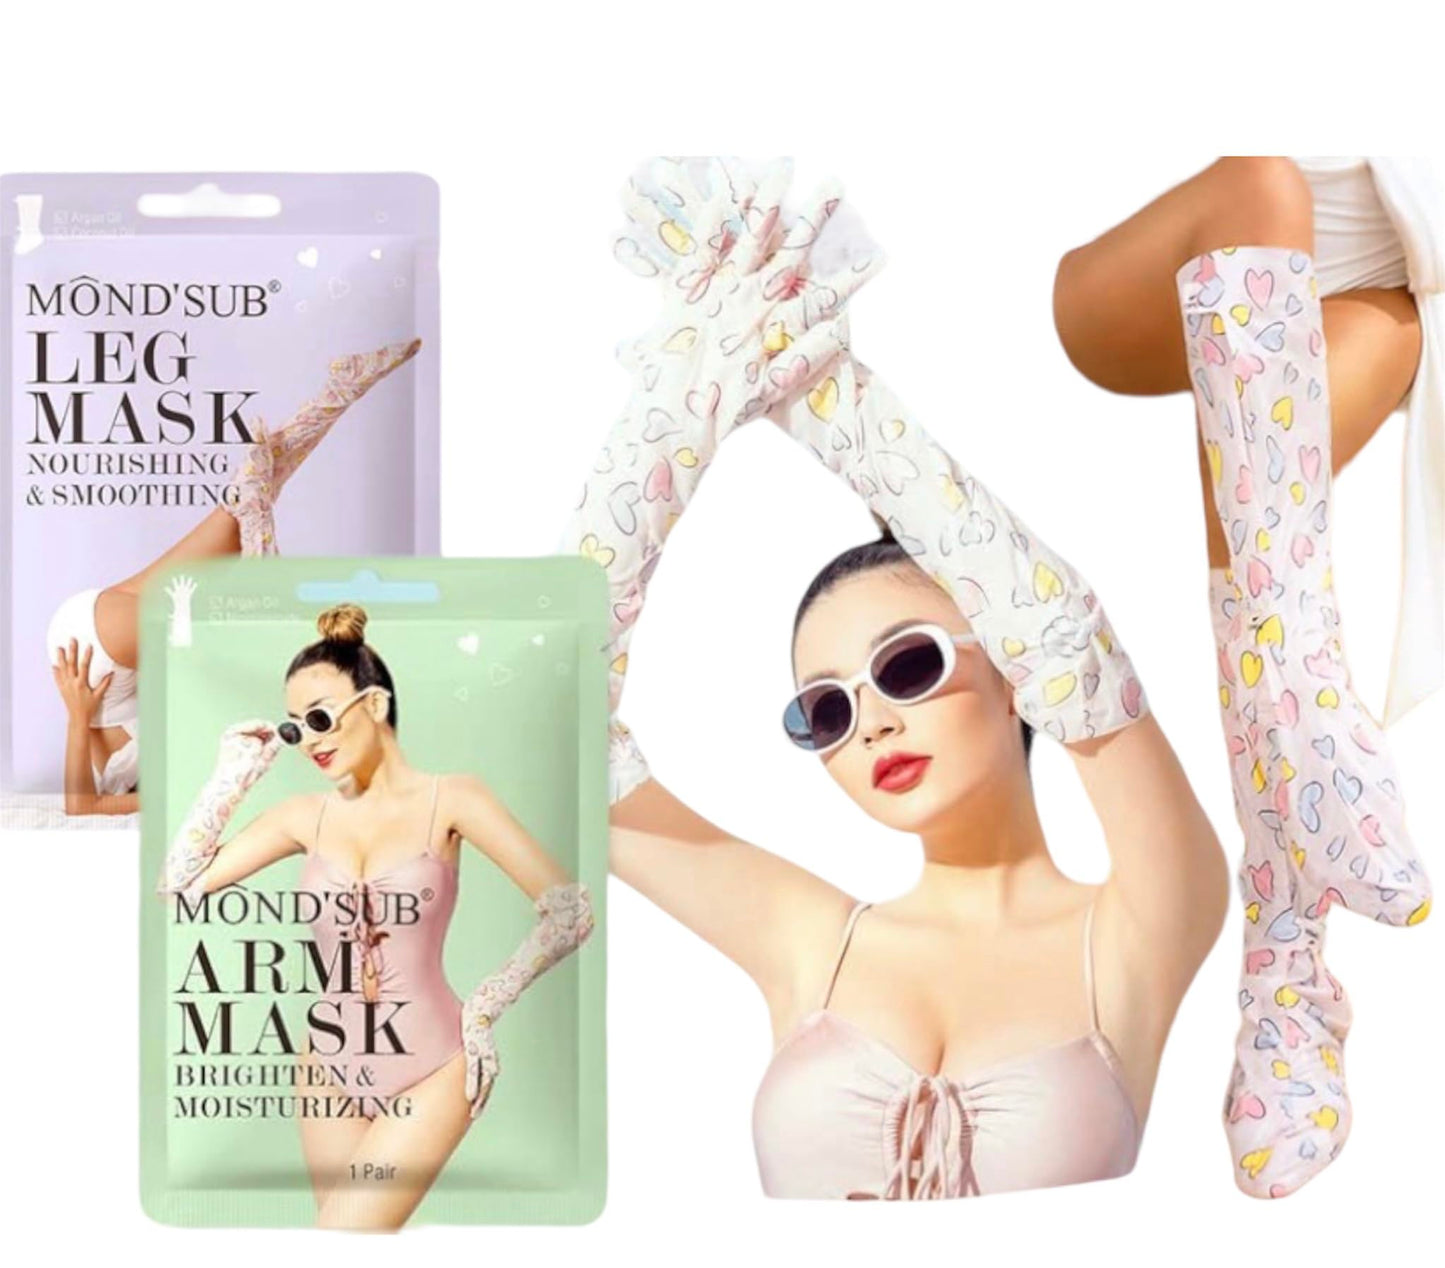 Arm Sleeves for Dry Cracked Hand Repair Mask for Working Hands & Hydrating Leg Wraps for Crepey Skin: Feet Socks for Dry Cracked Heels: Leg Relax Therapy, Leg Exfoliator for Strawberry Legs